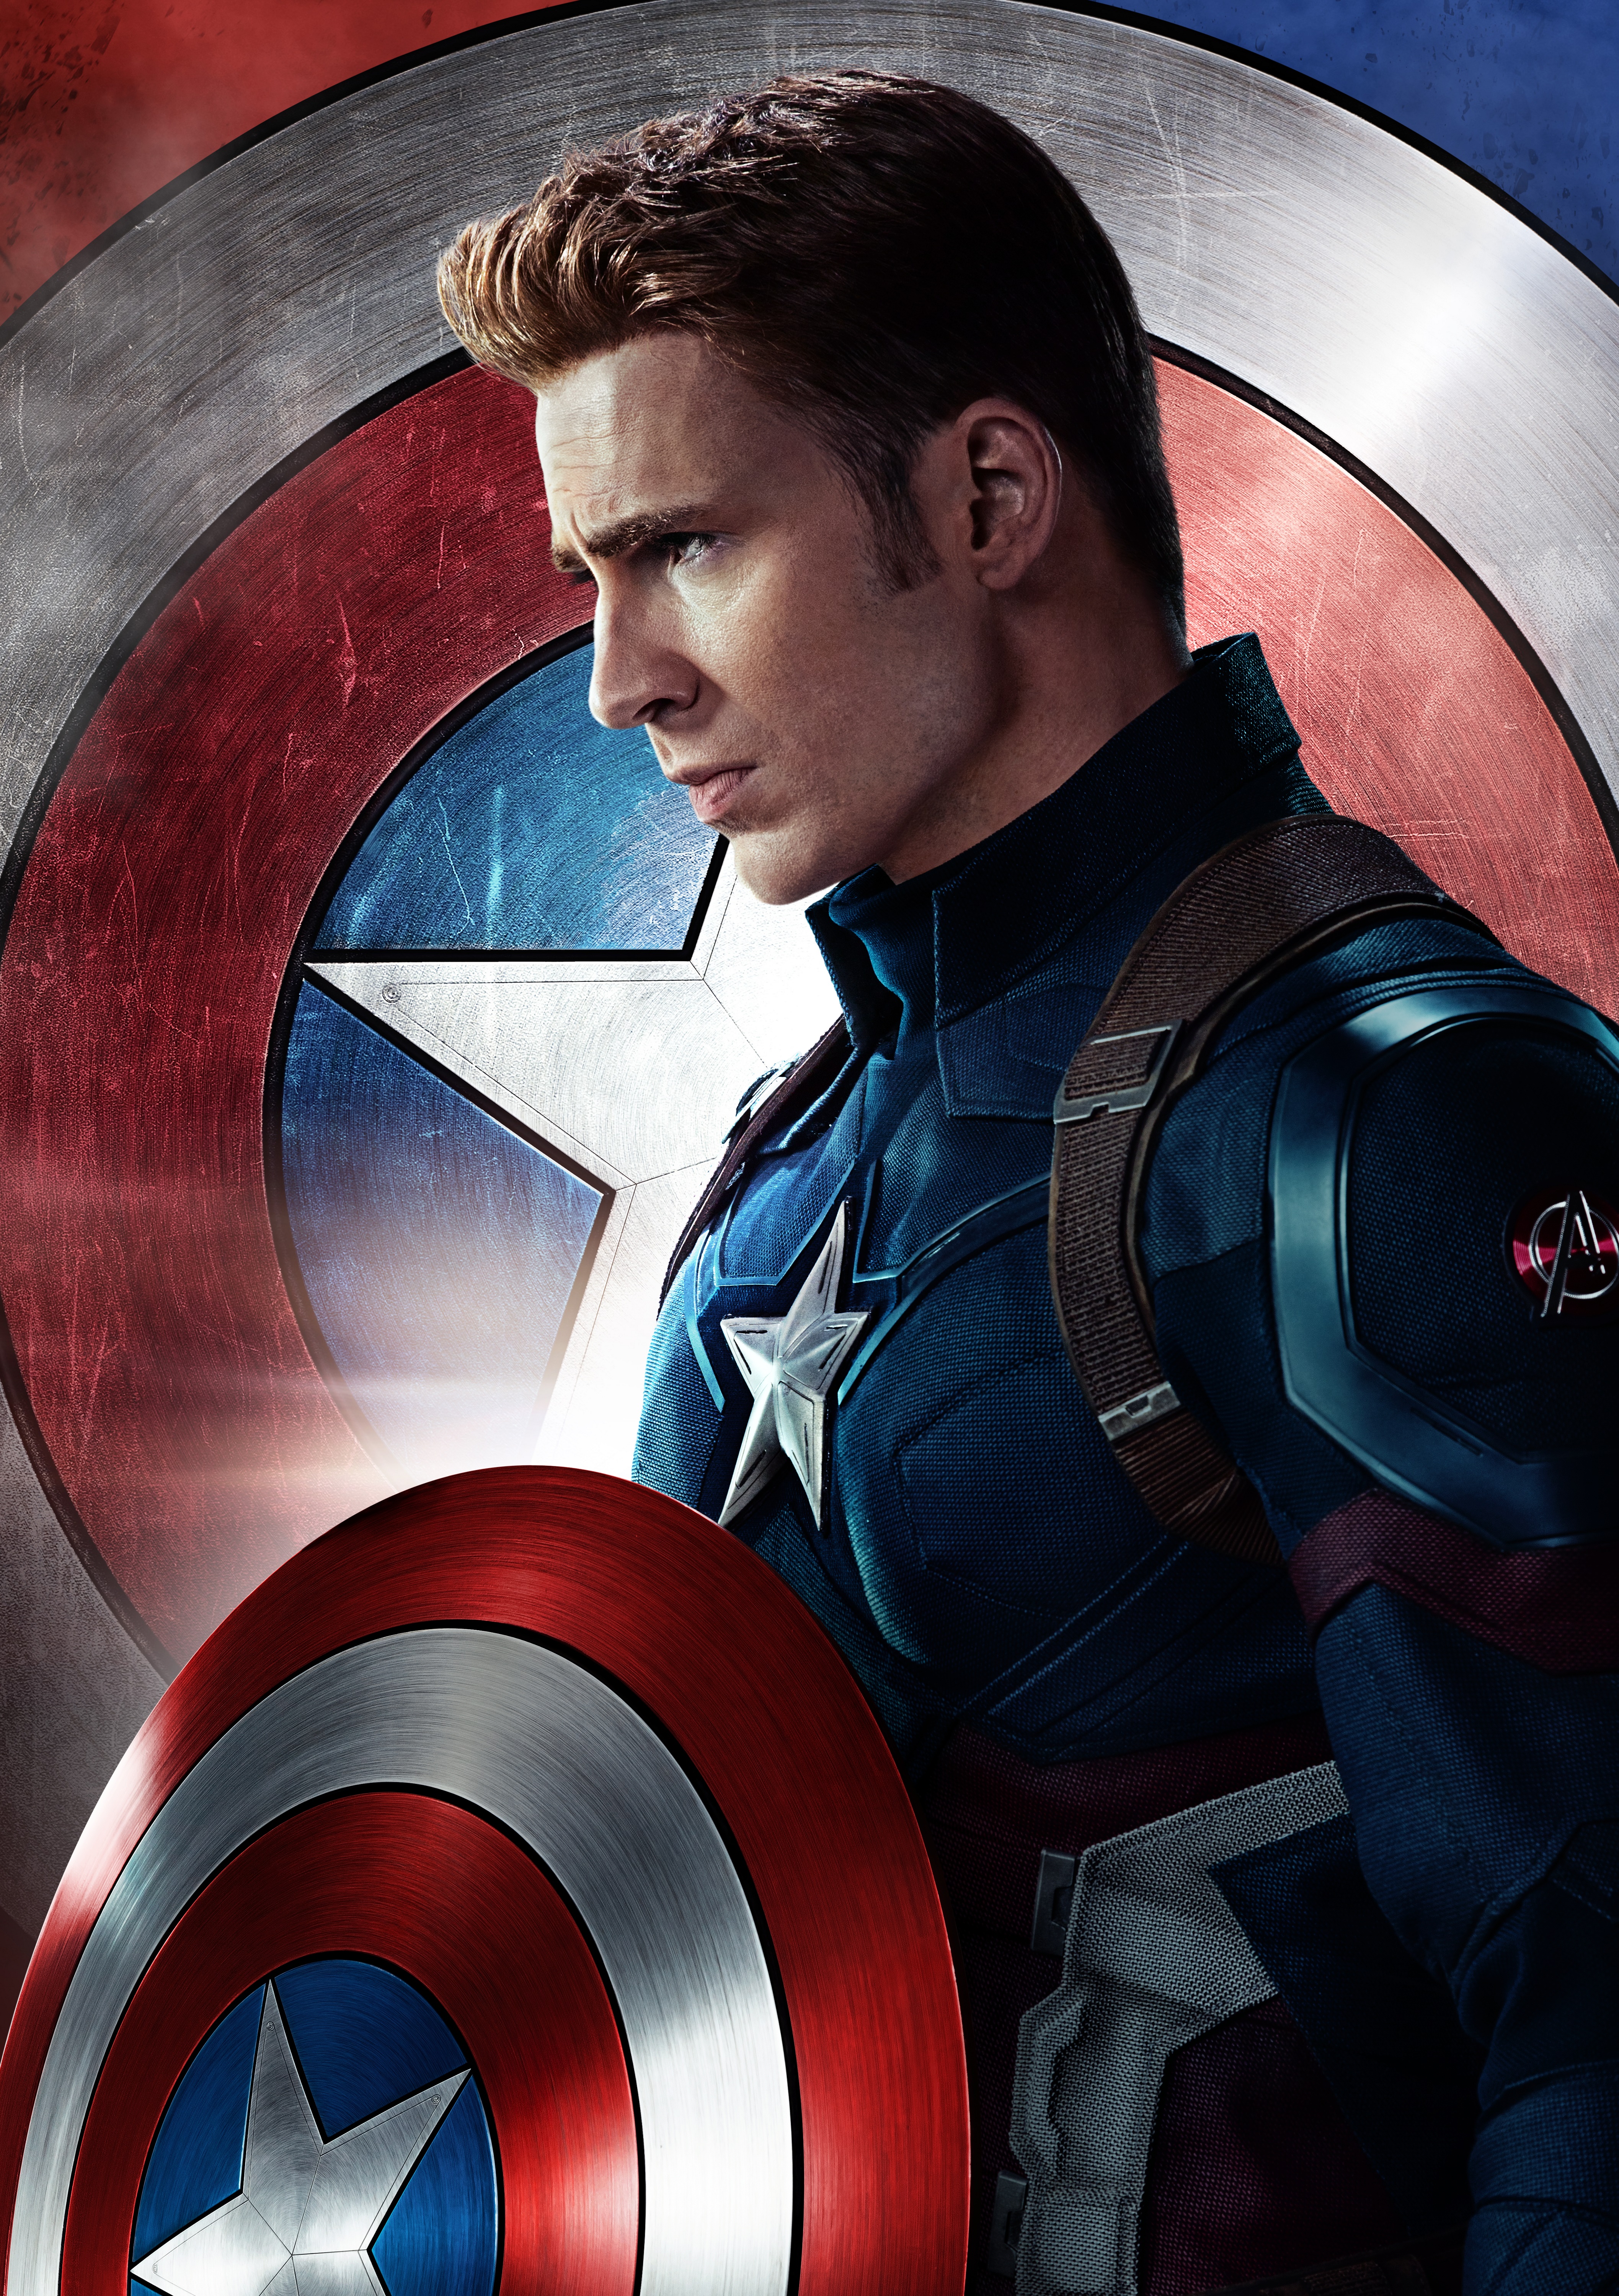 20 Best Chris Evans Hairstyles with Images - AtoZ Hairstyles